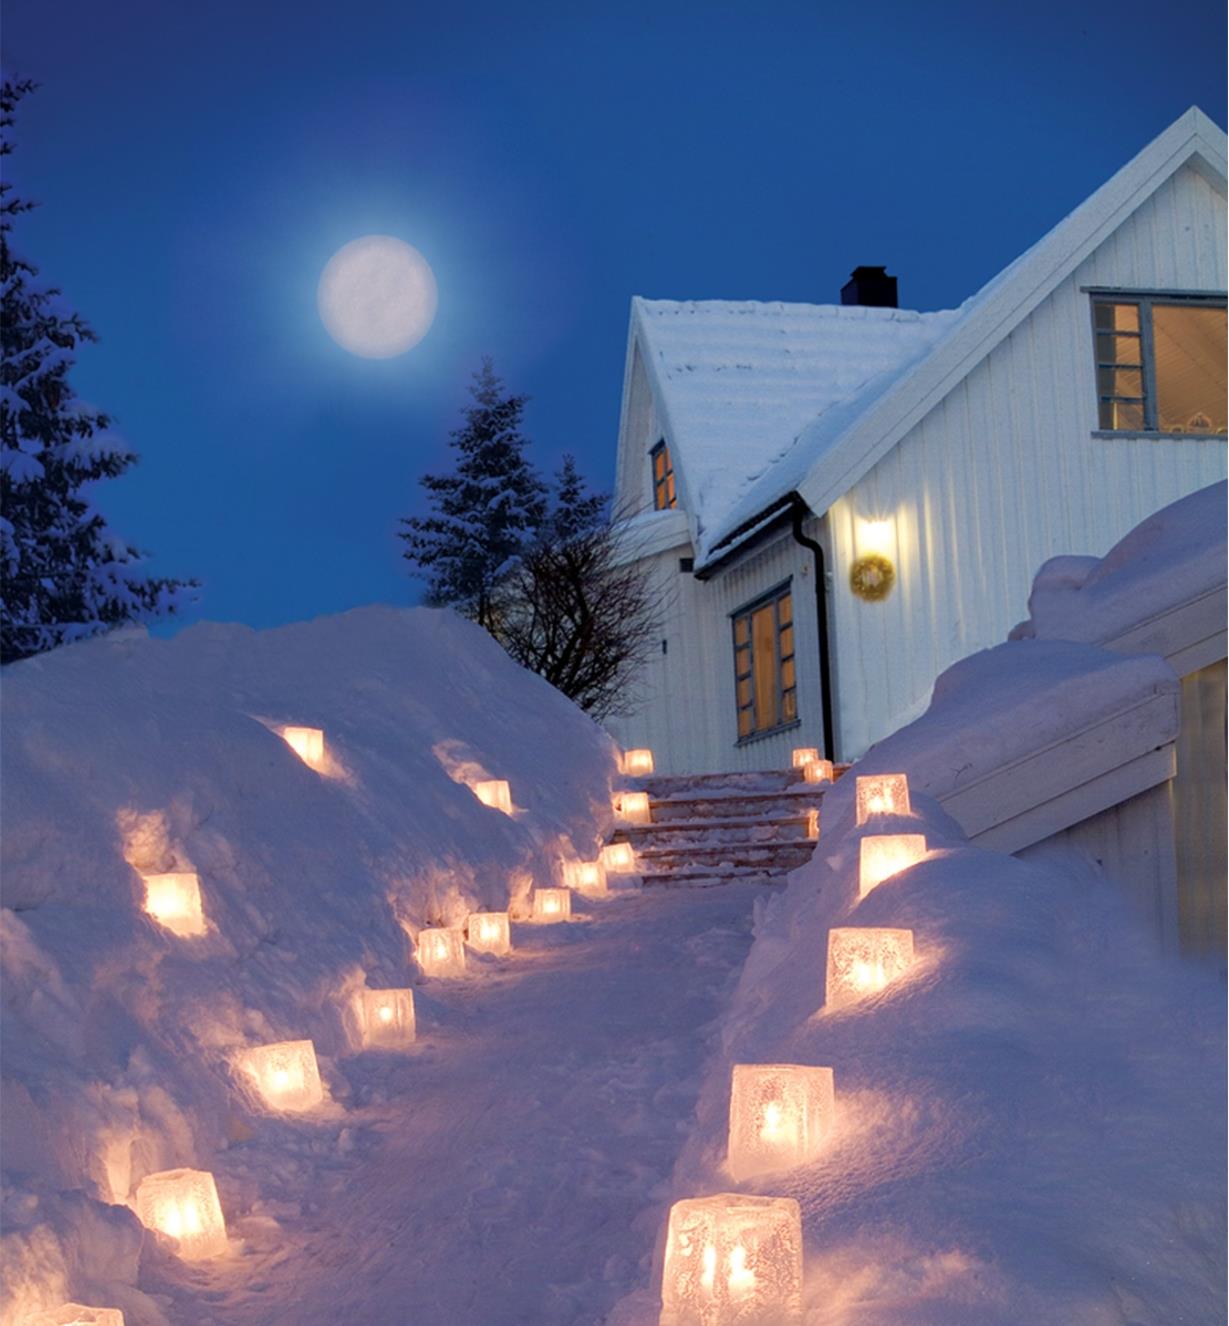 Ice lanterns set along a snowy walkway leading to a house